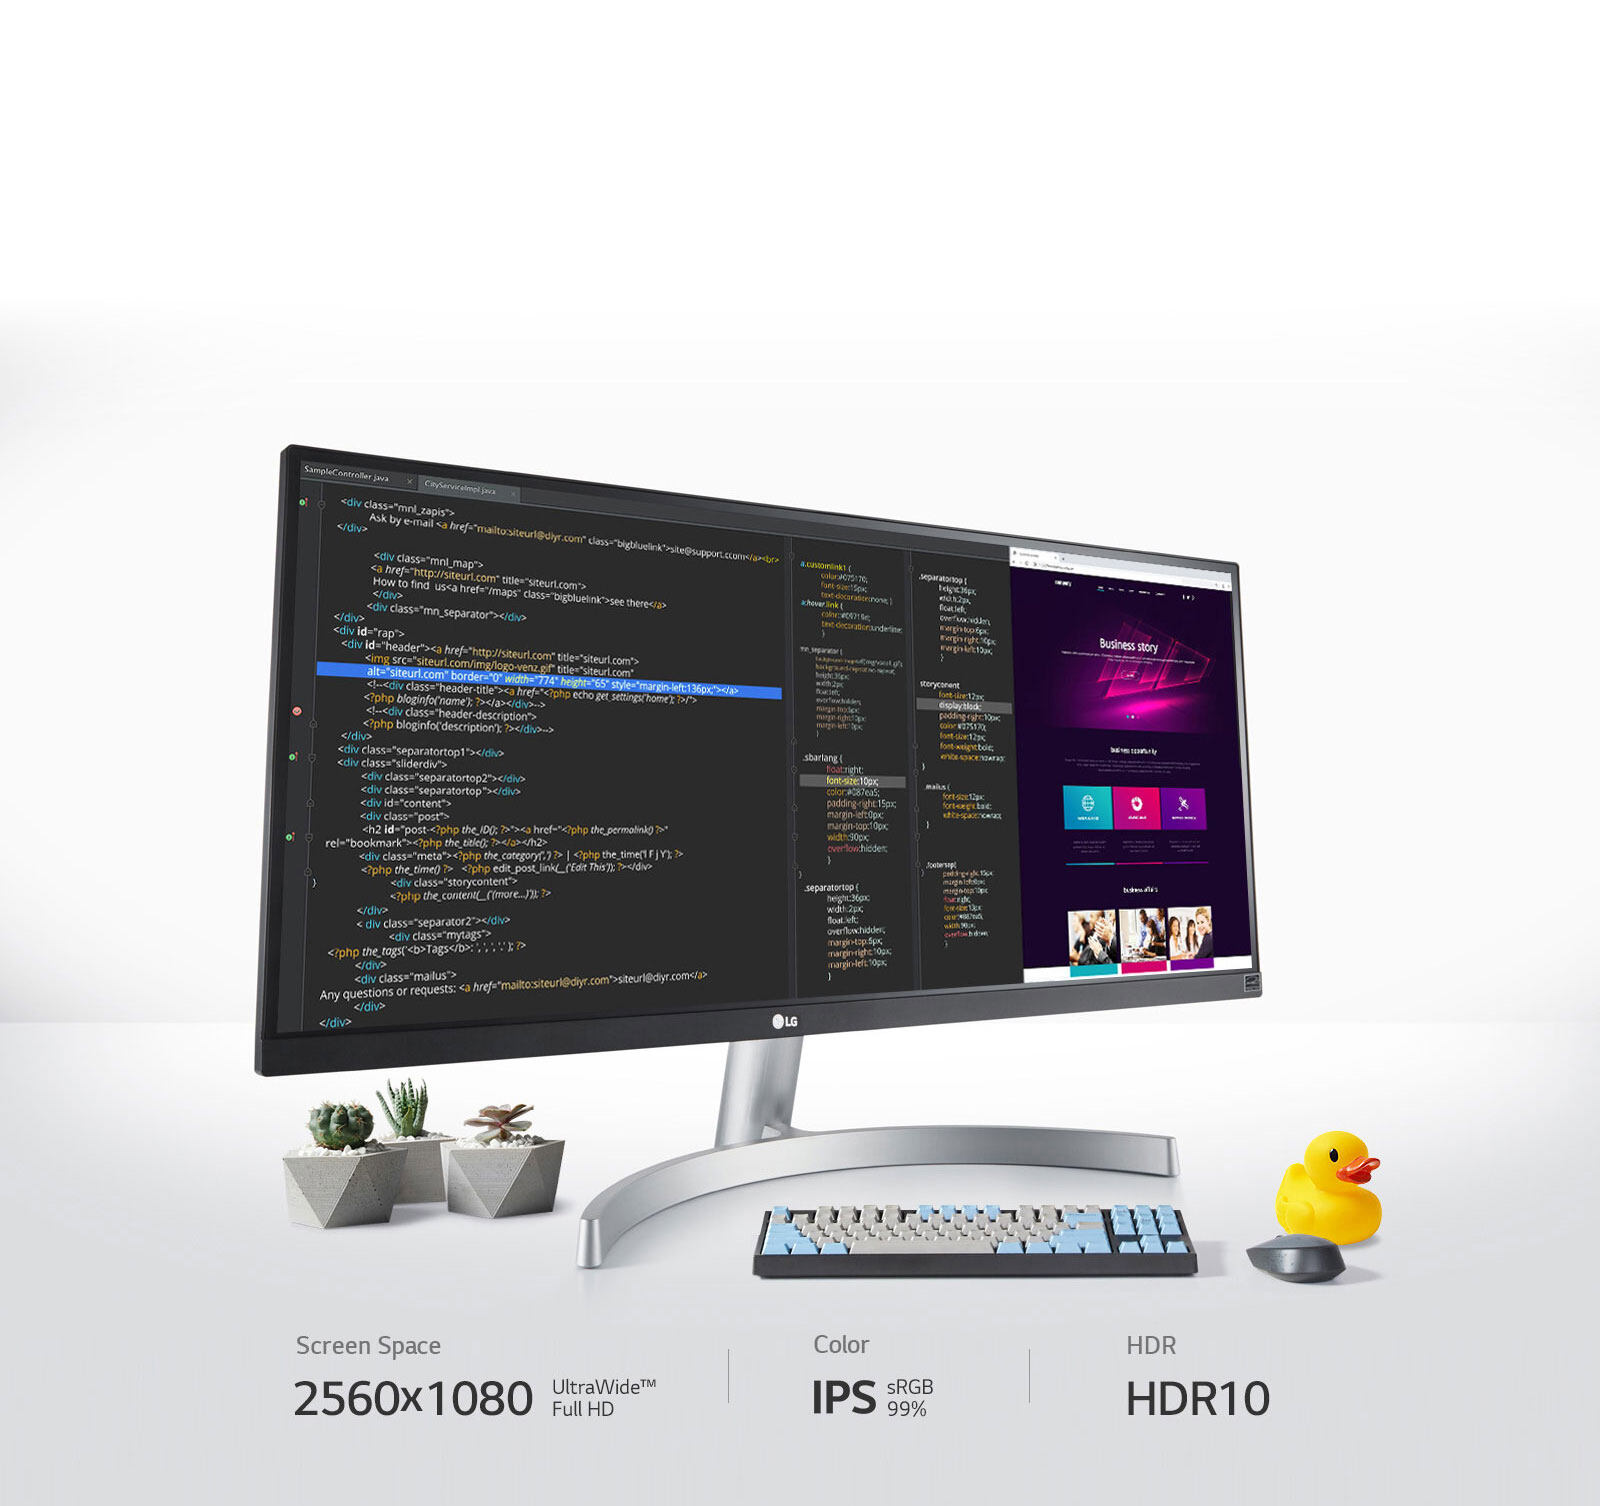 By providing 2560x1080 UltraWide™ Full HD screen, IPS, sRGB 99% and HDR 10, you can See More Create Better.